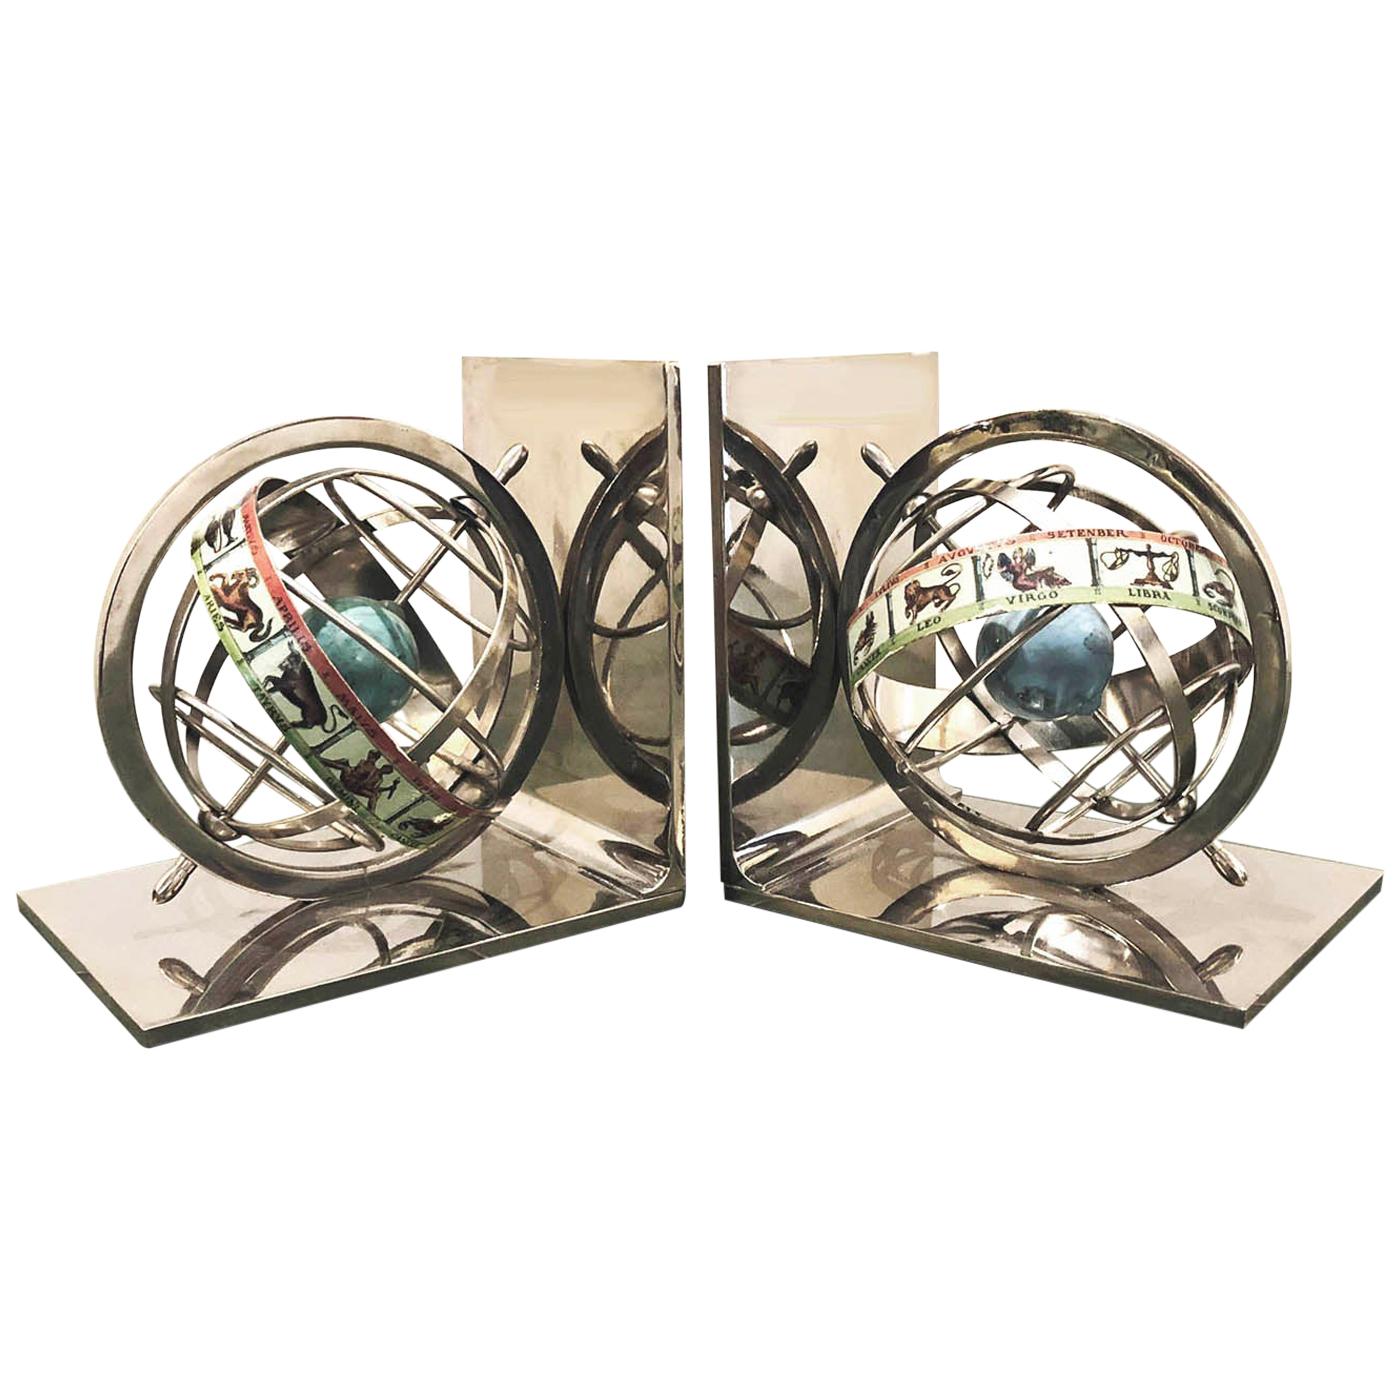 Pair of Astrological Bookends